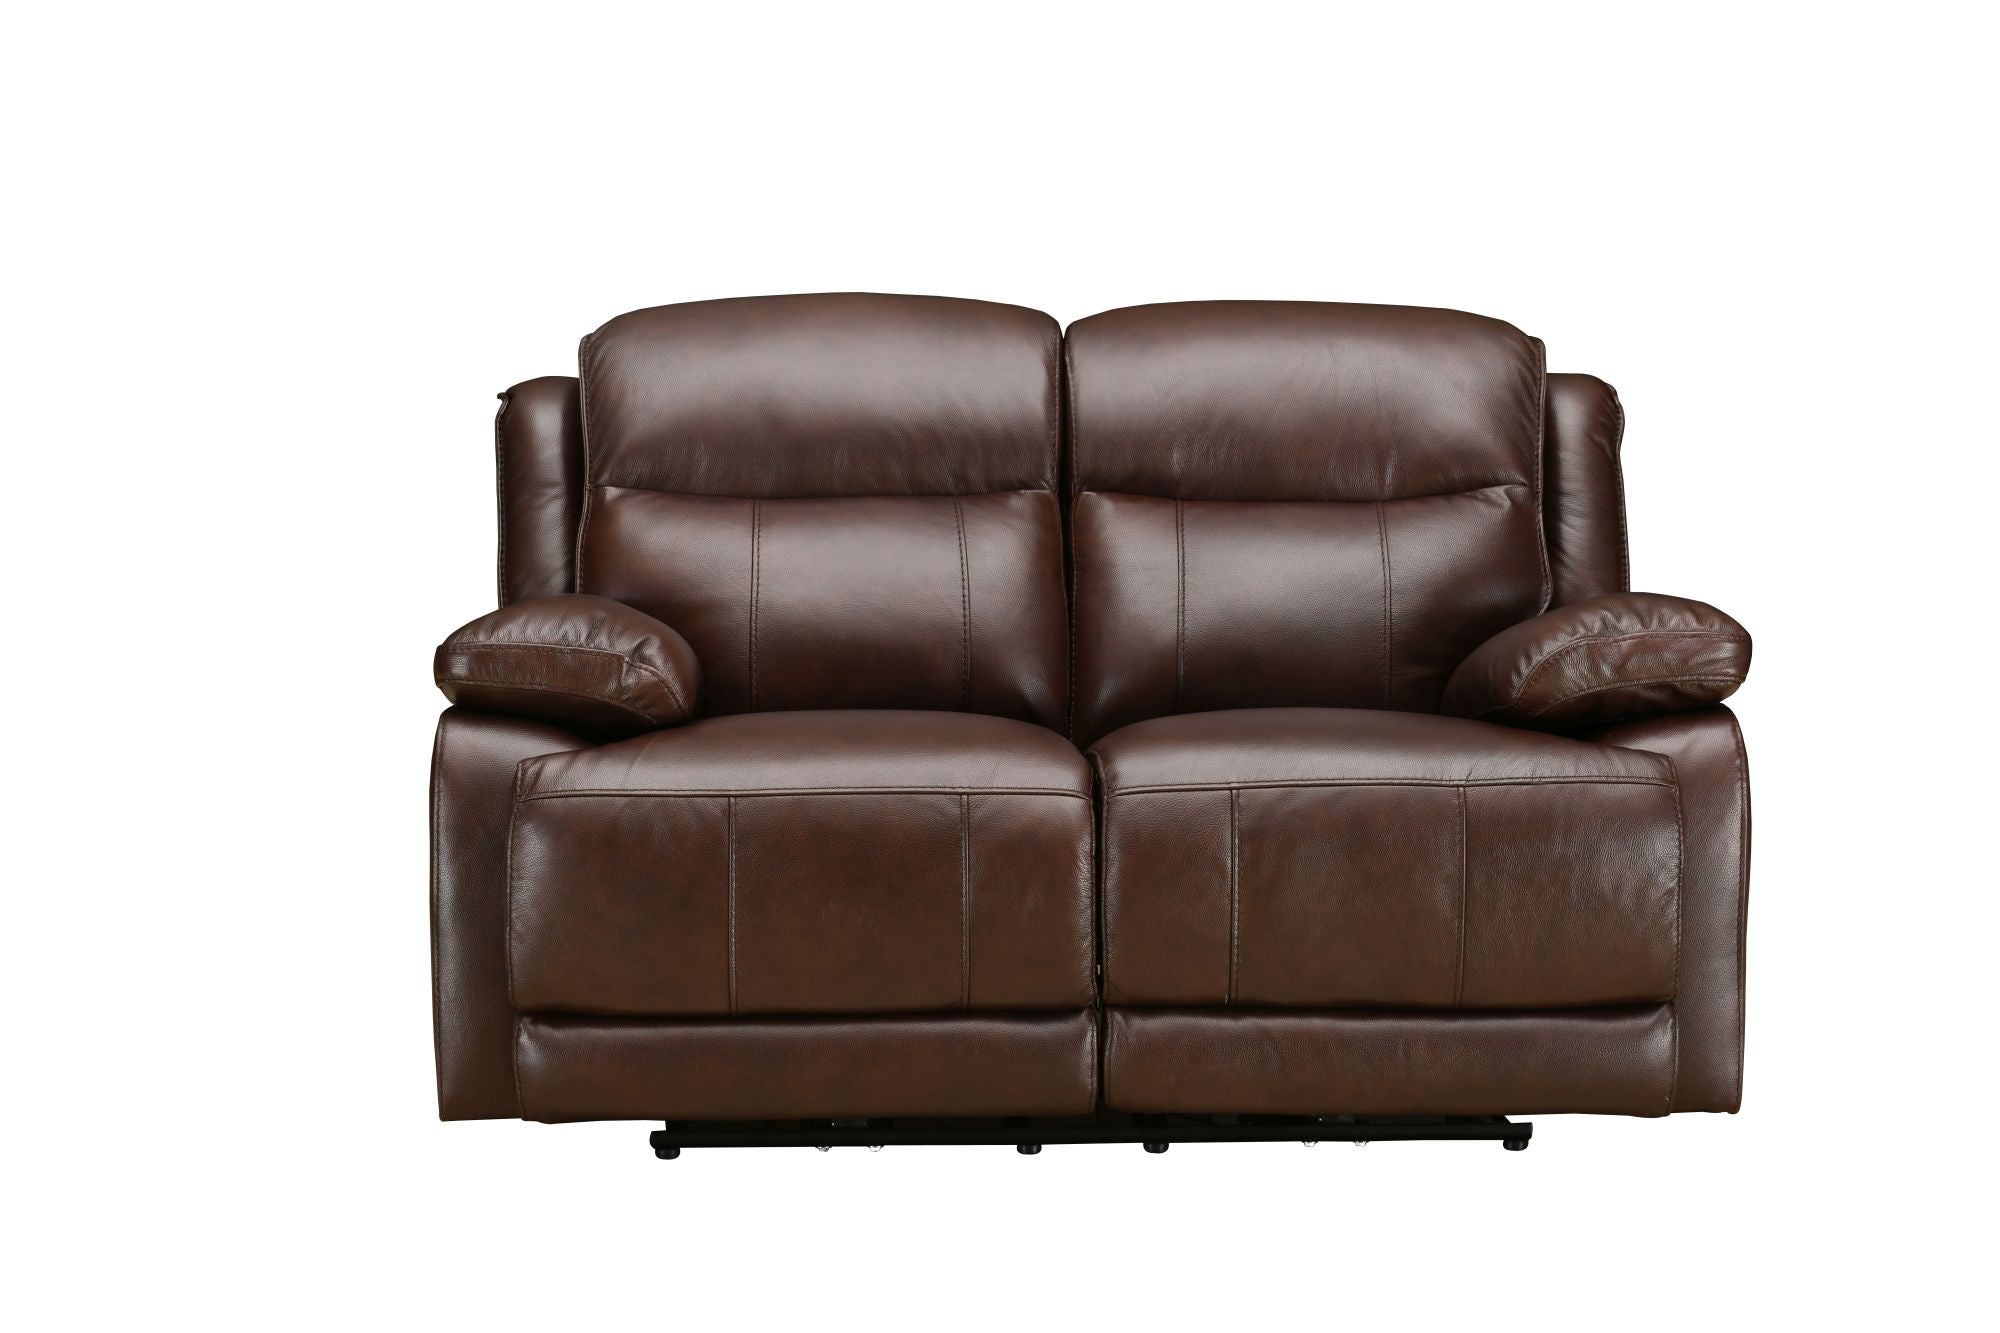 Montana 2 Seater Leather Recliner Sofa in Brown